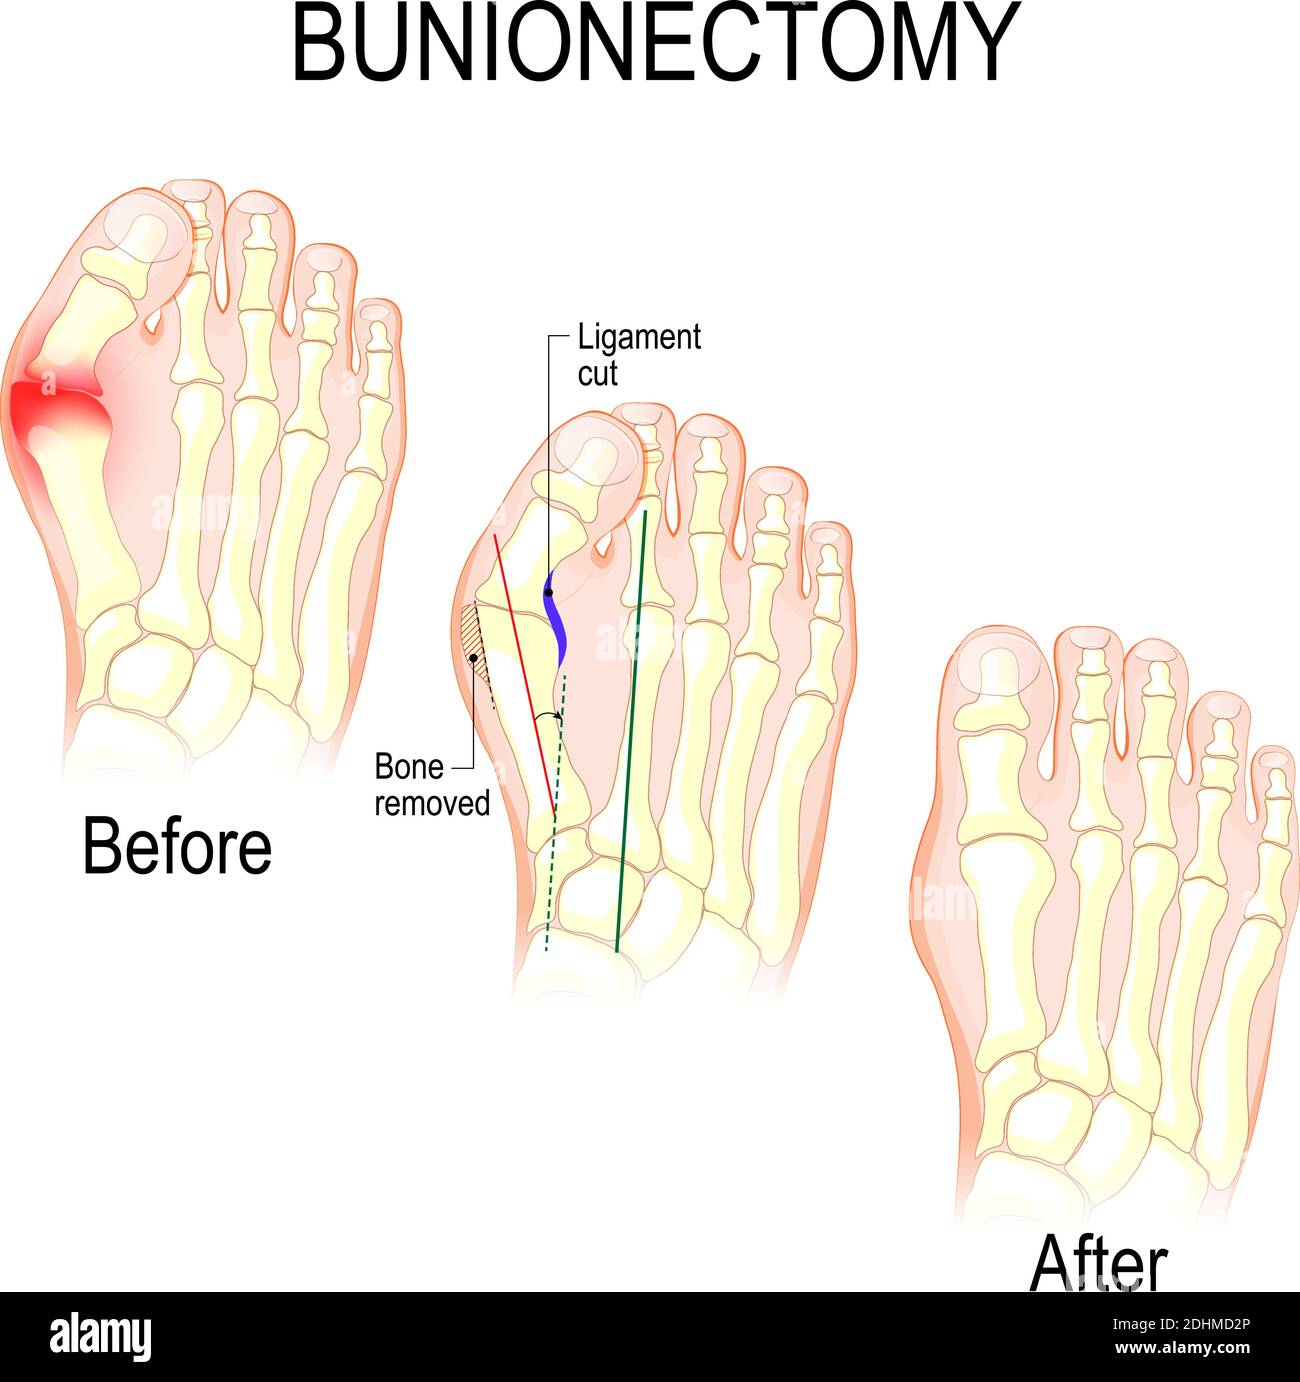 Bunionectomy is a procedure to correct of pathologies and deformity of the joint connecting the big toe to the foot. Before and after of Surgery Stock Vector